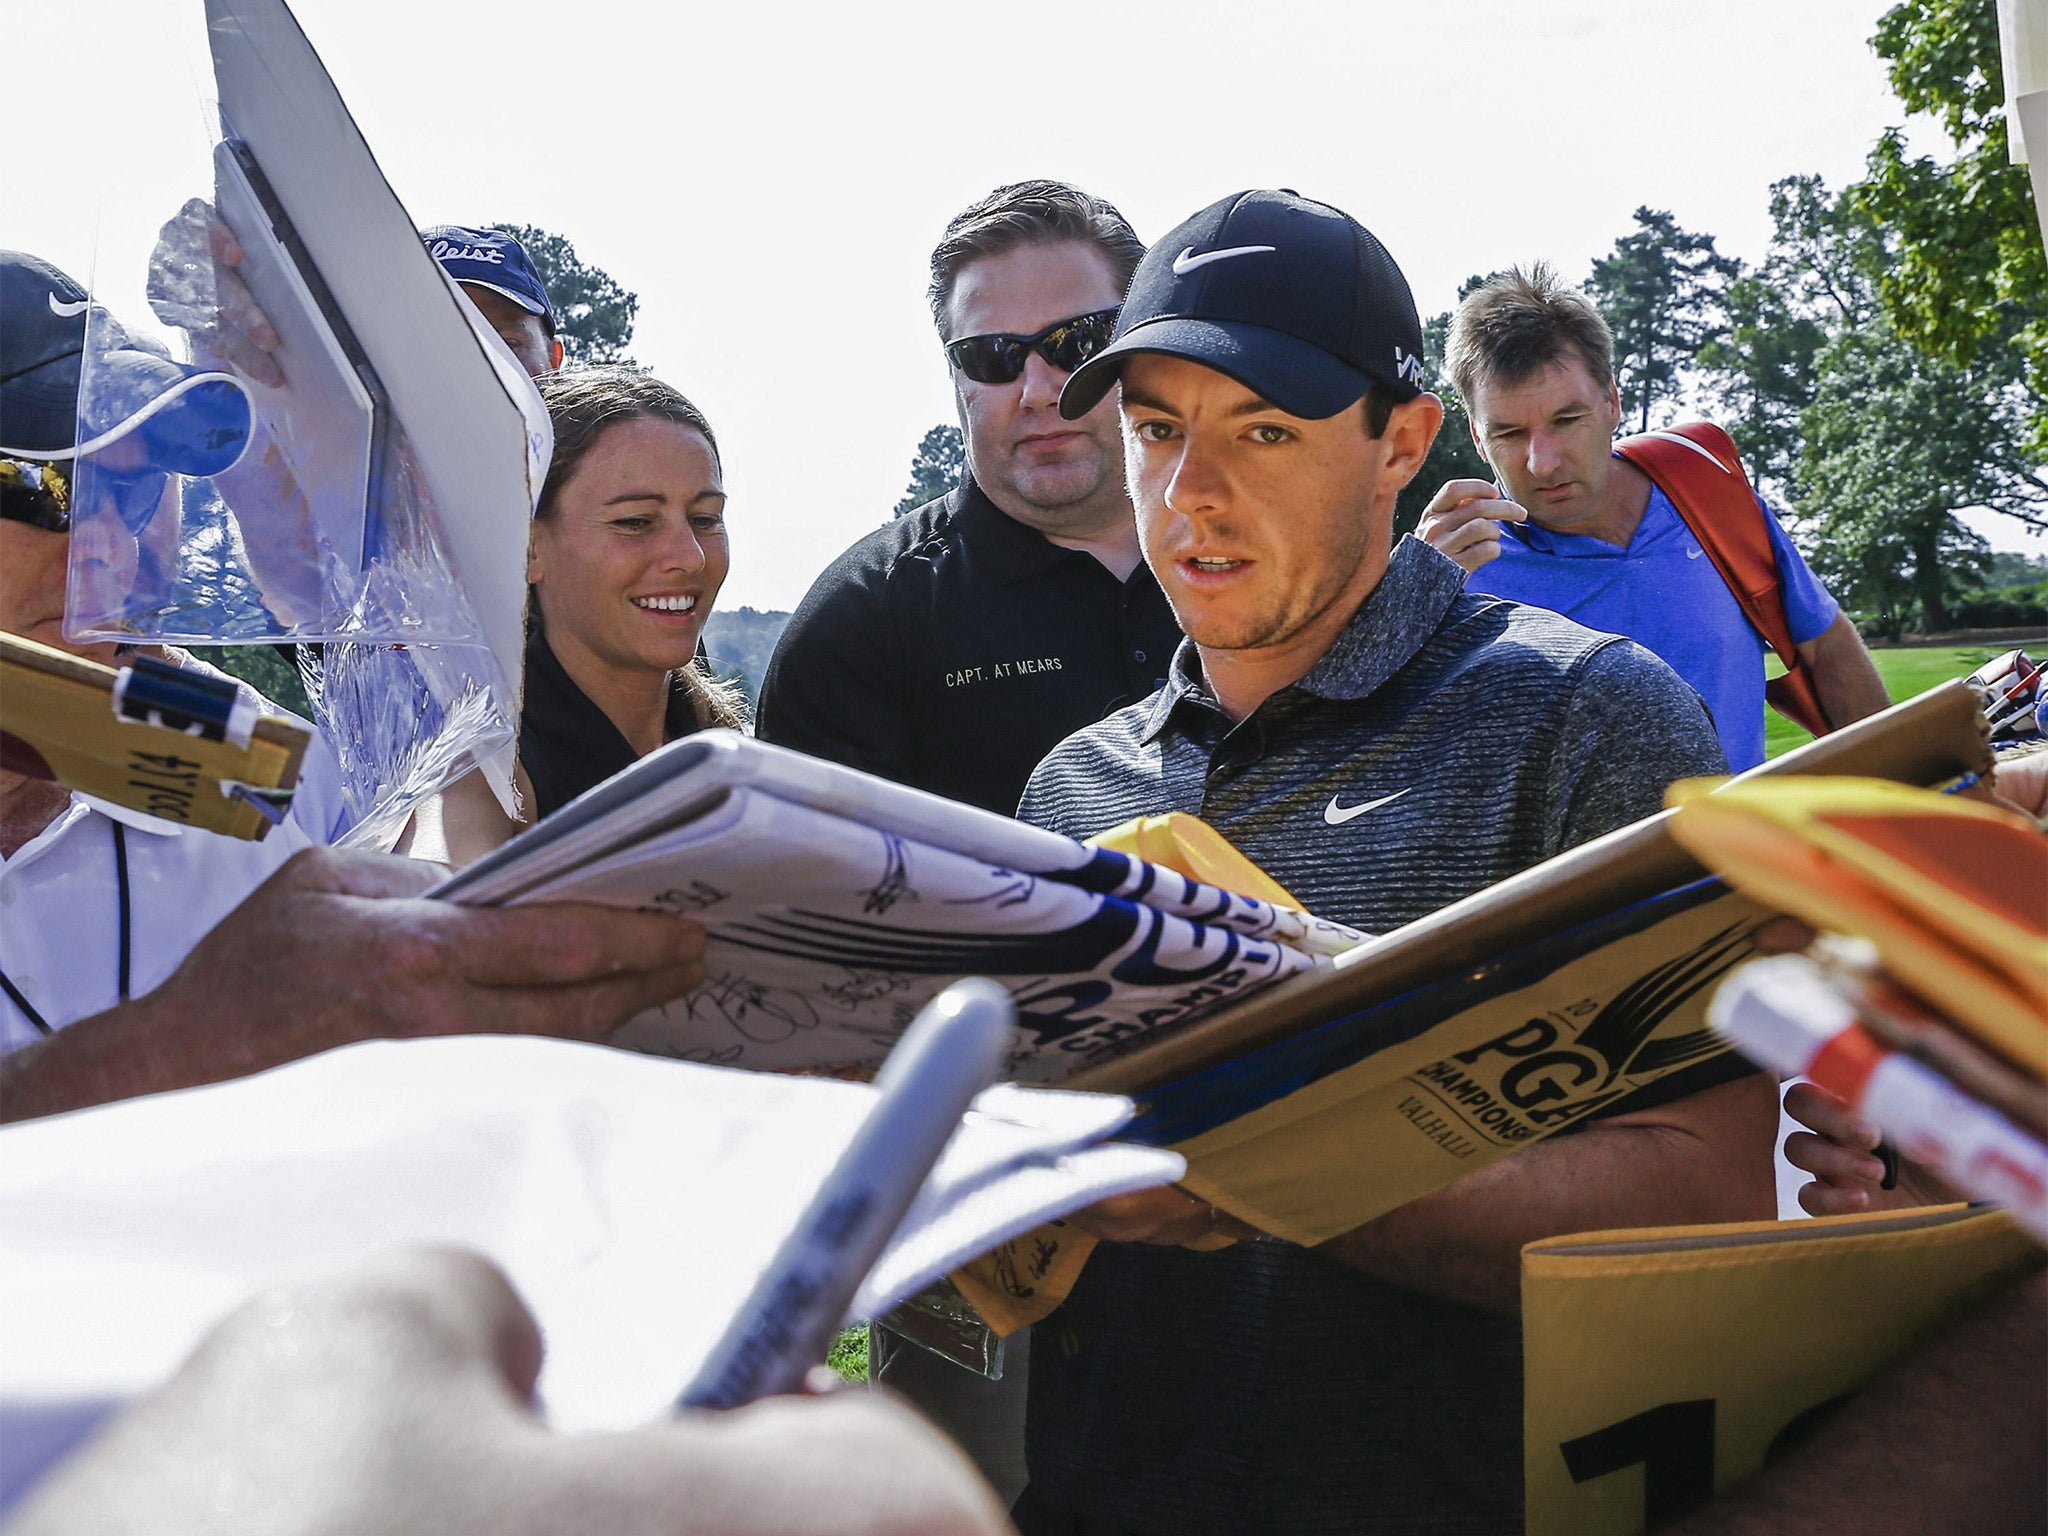 Rory McIlroy takes time out to sign autographs in Atlanta ahead of the FedEx Cup Play-offs